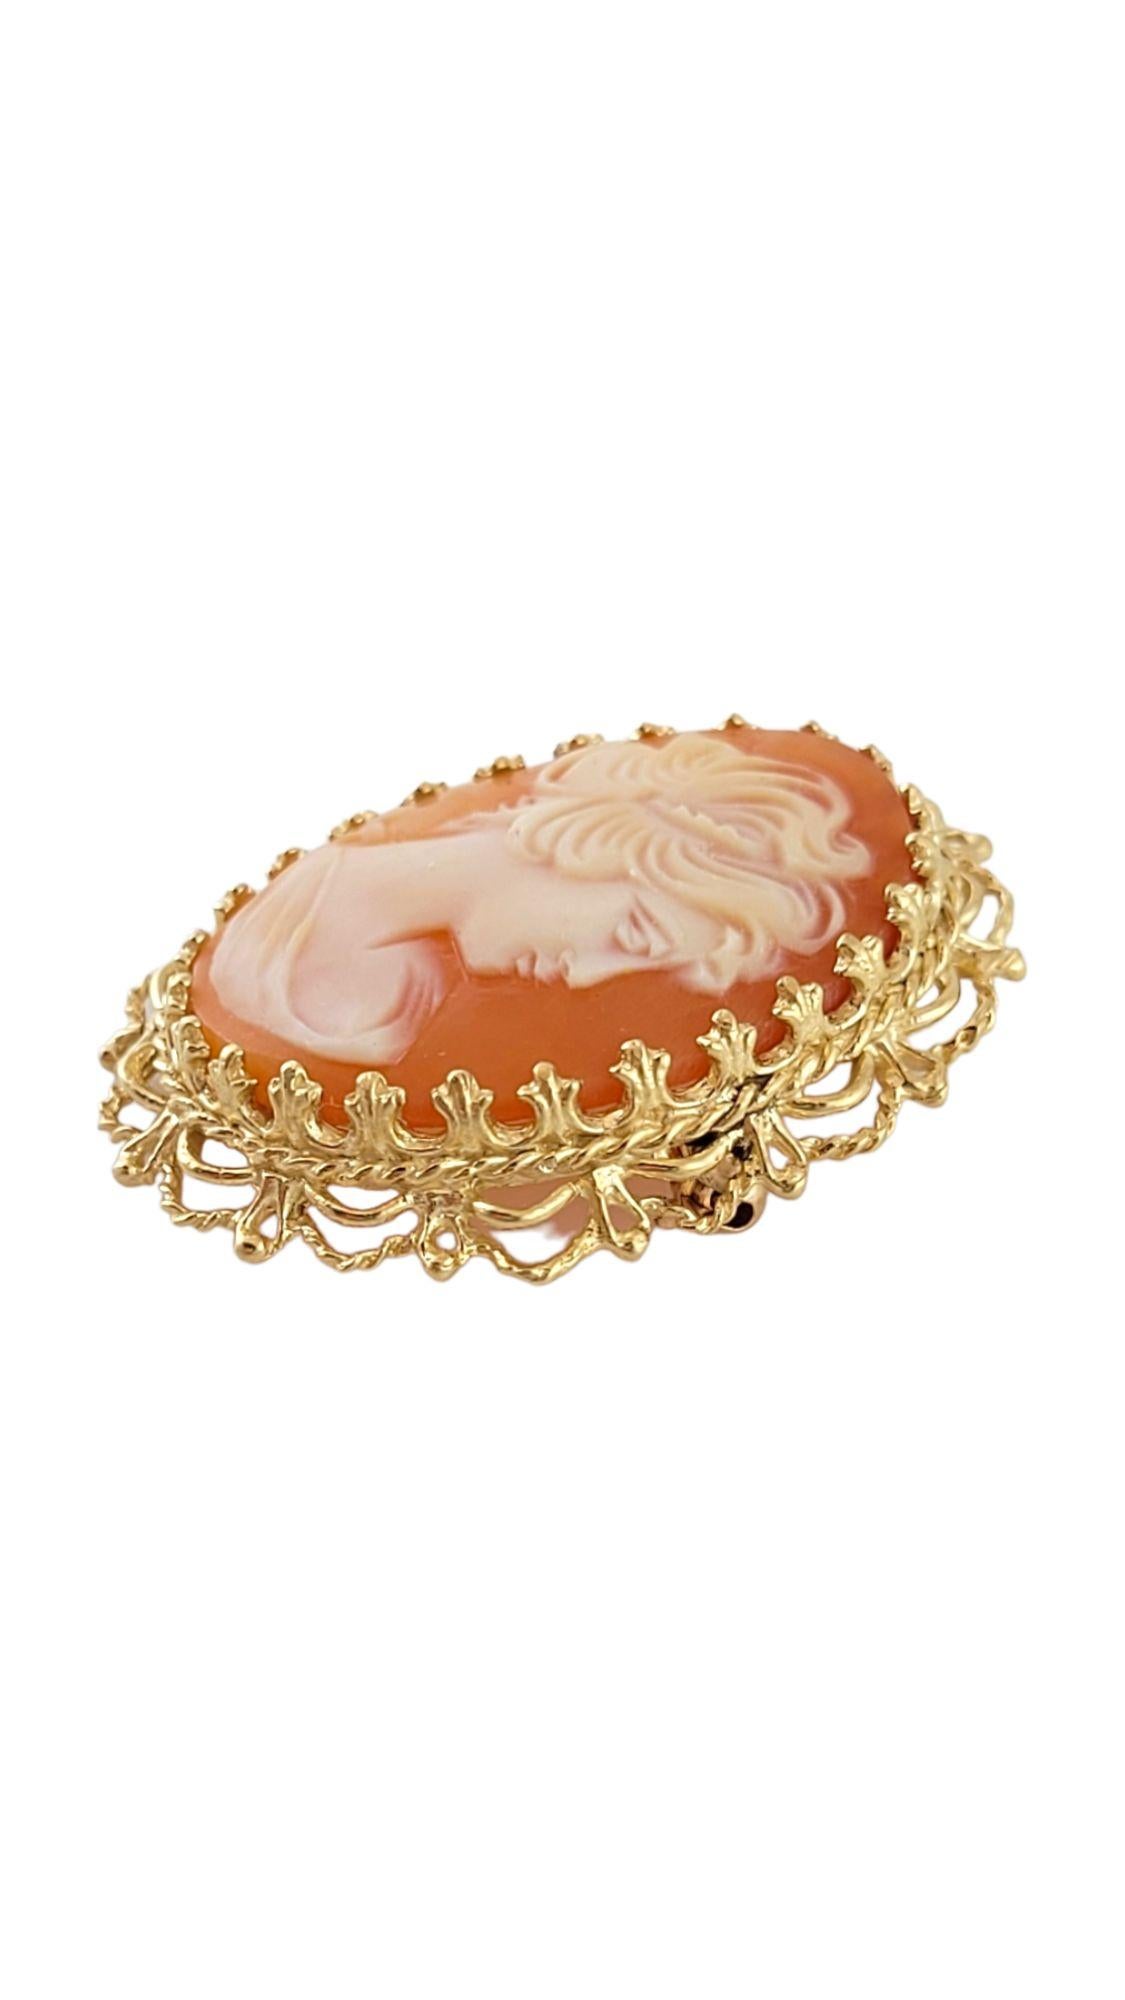 14K Yellow Gold Cameo Pin/Pendant #14667 In Good Condition For Sale In Washington Depot, CT